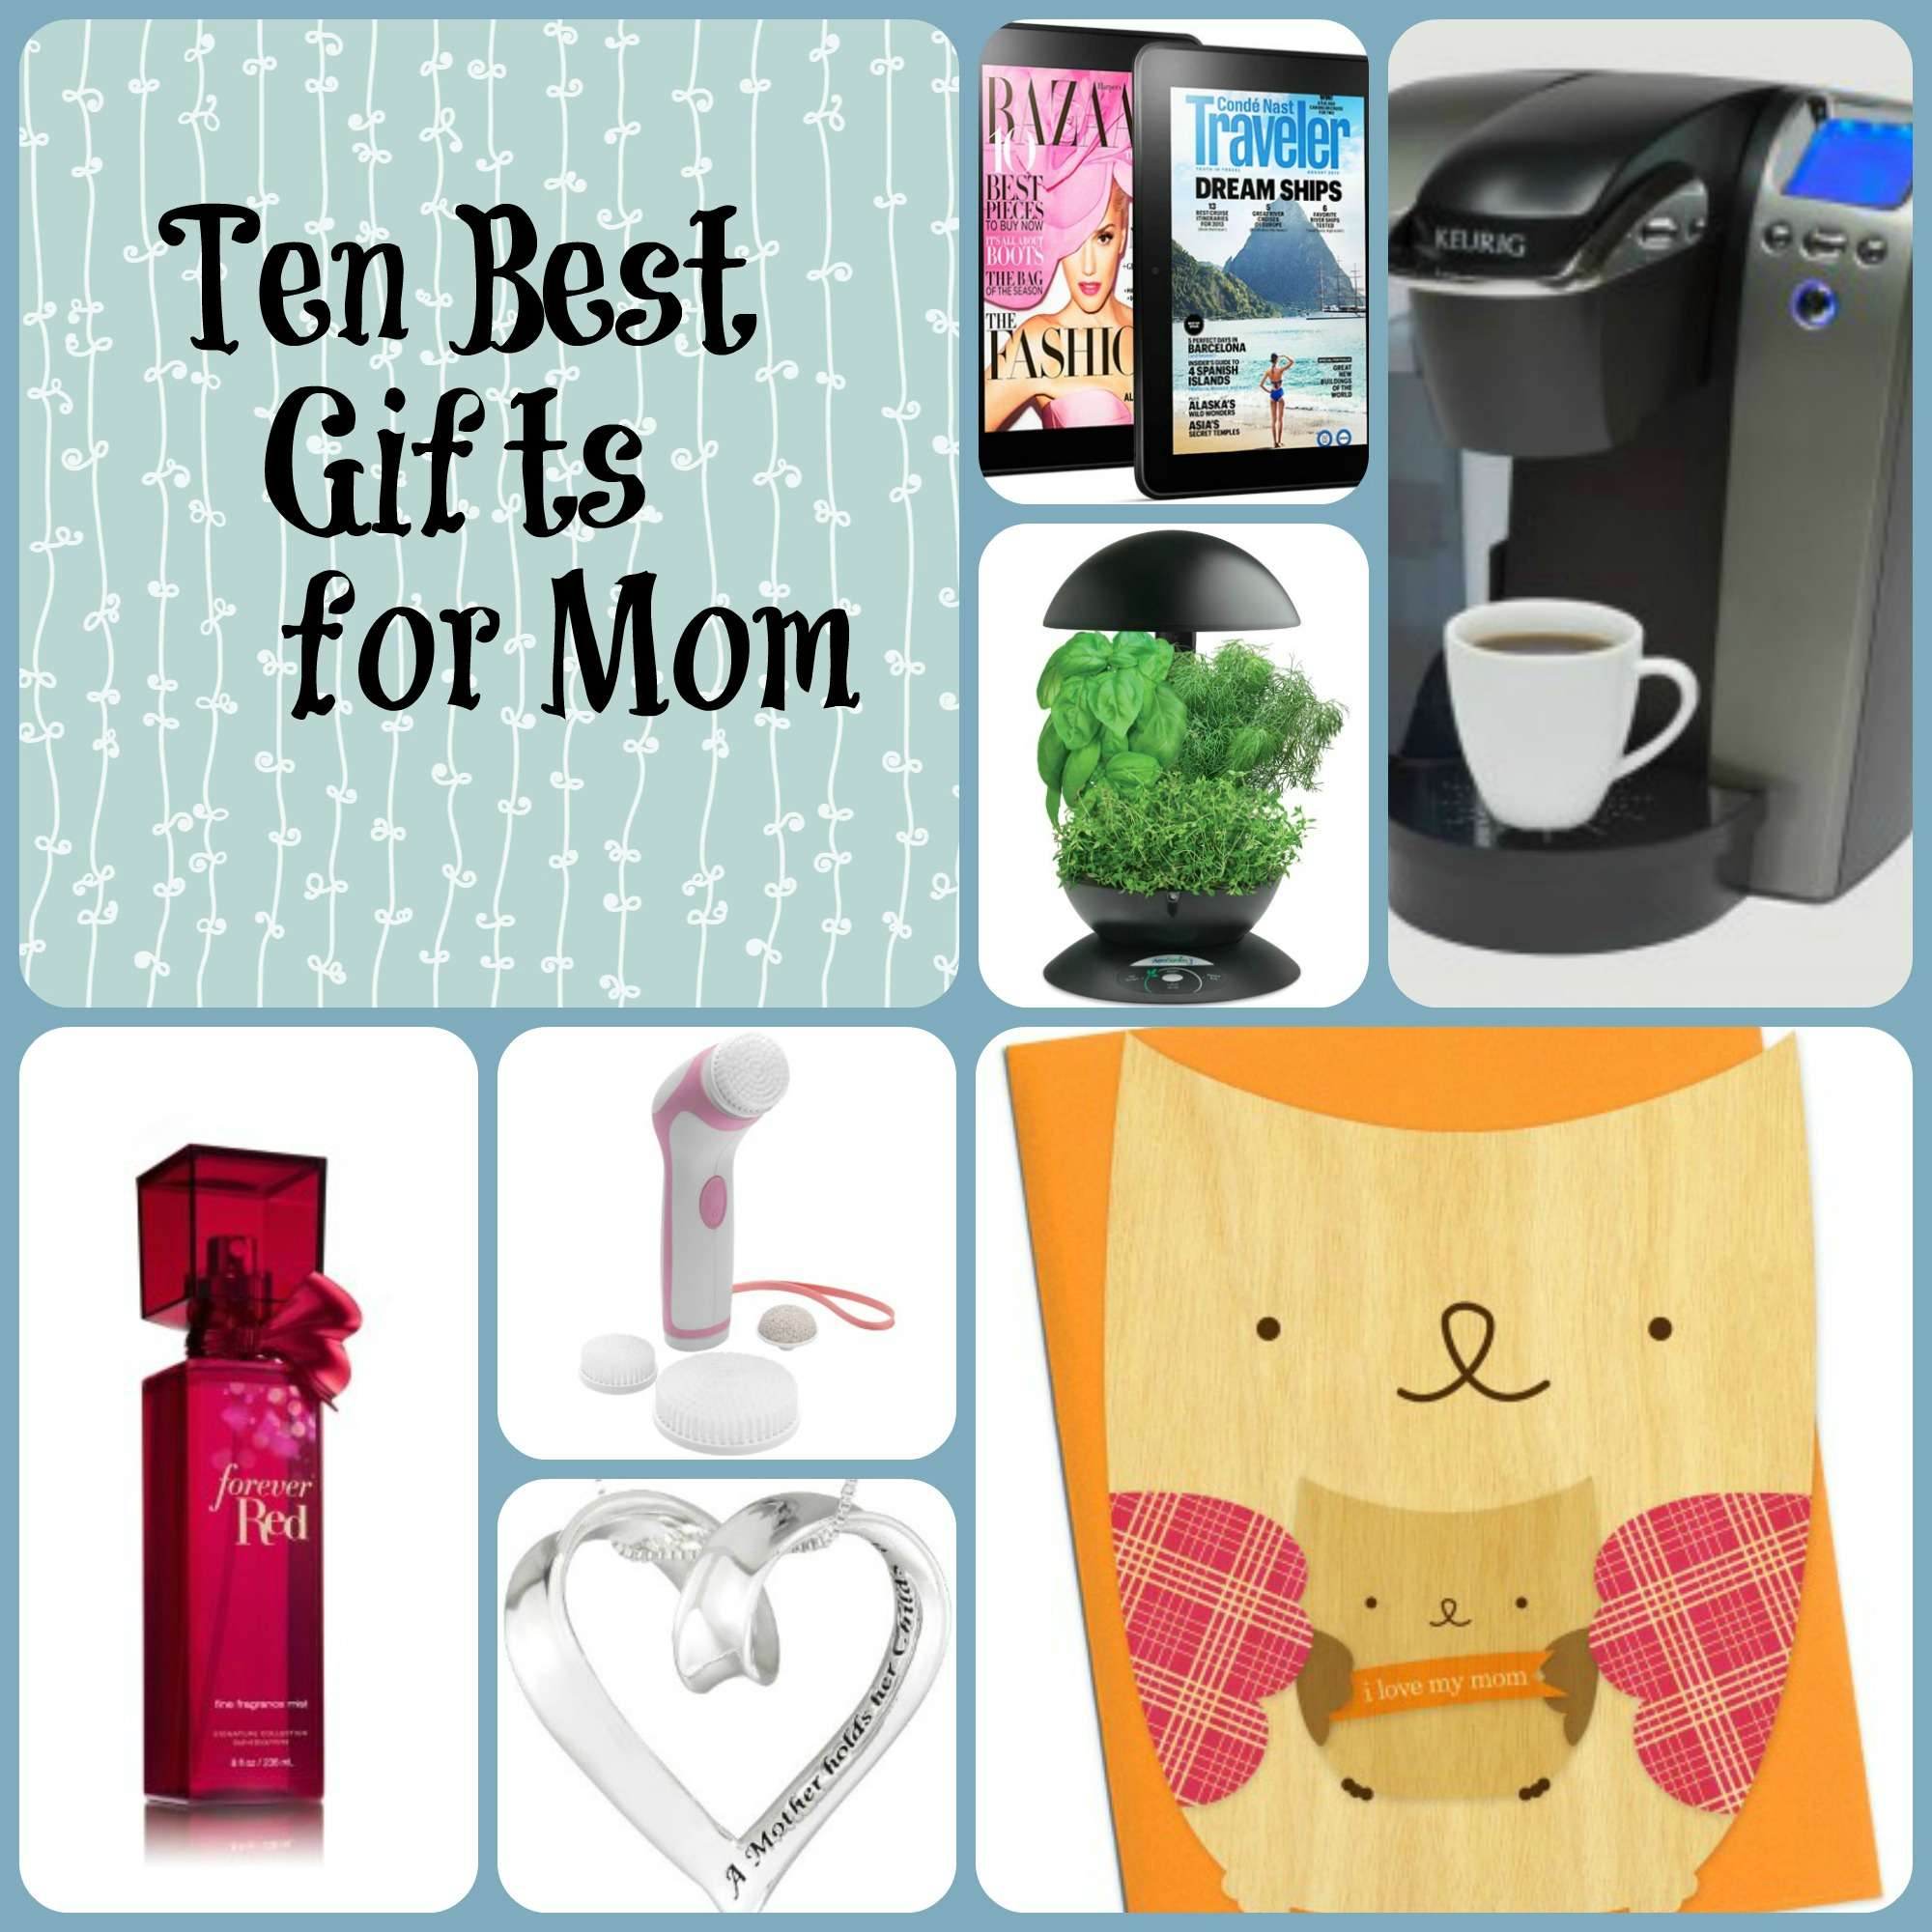 Ten Best Gifts for Mom